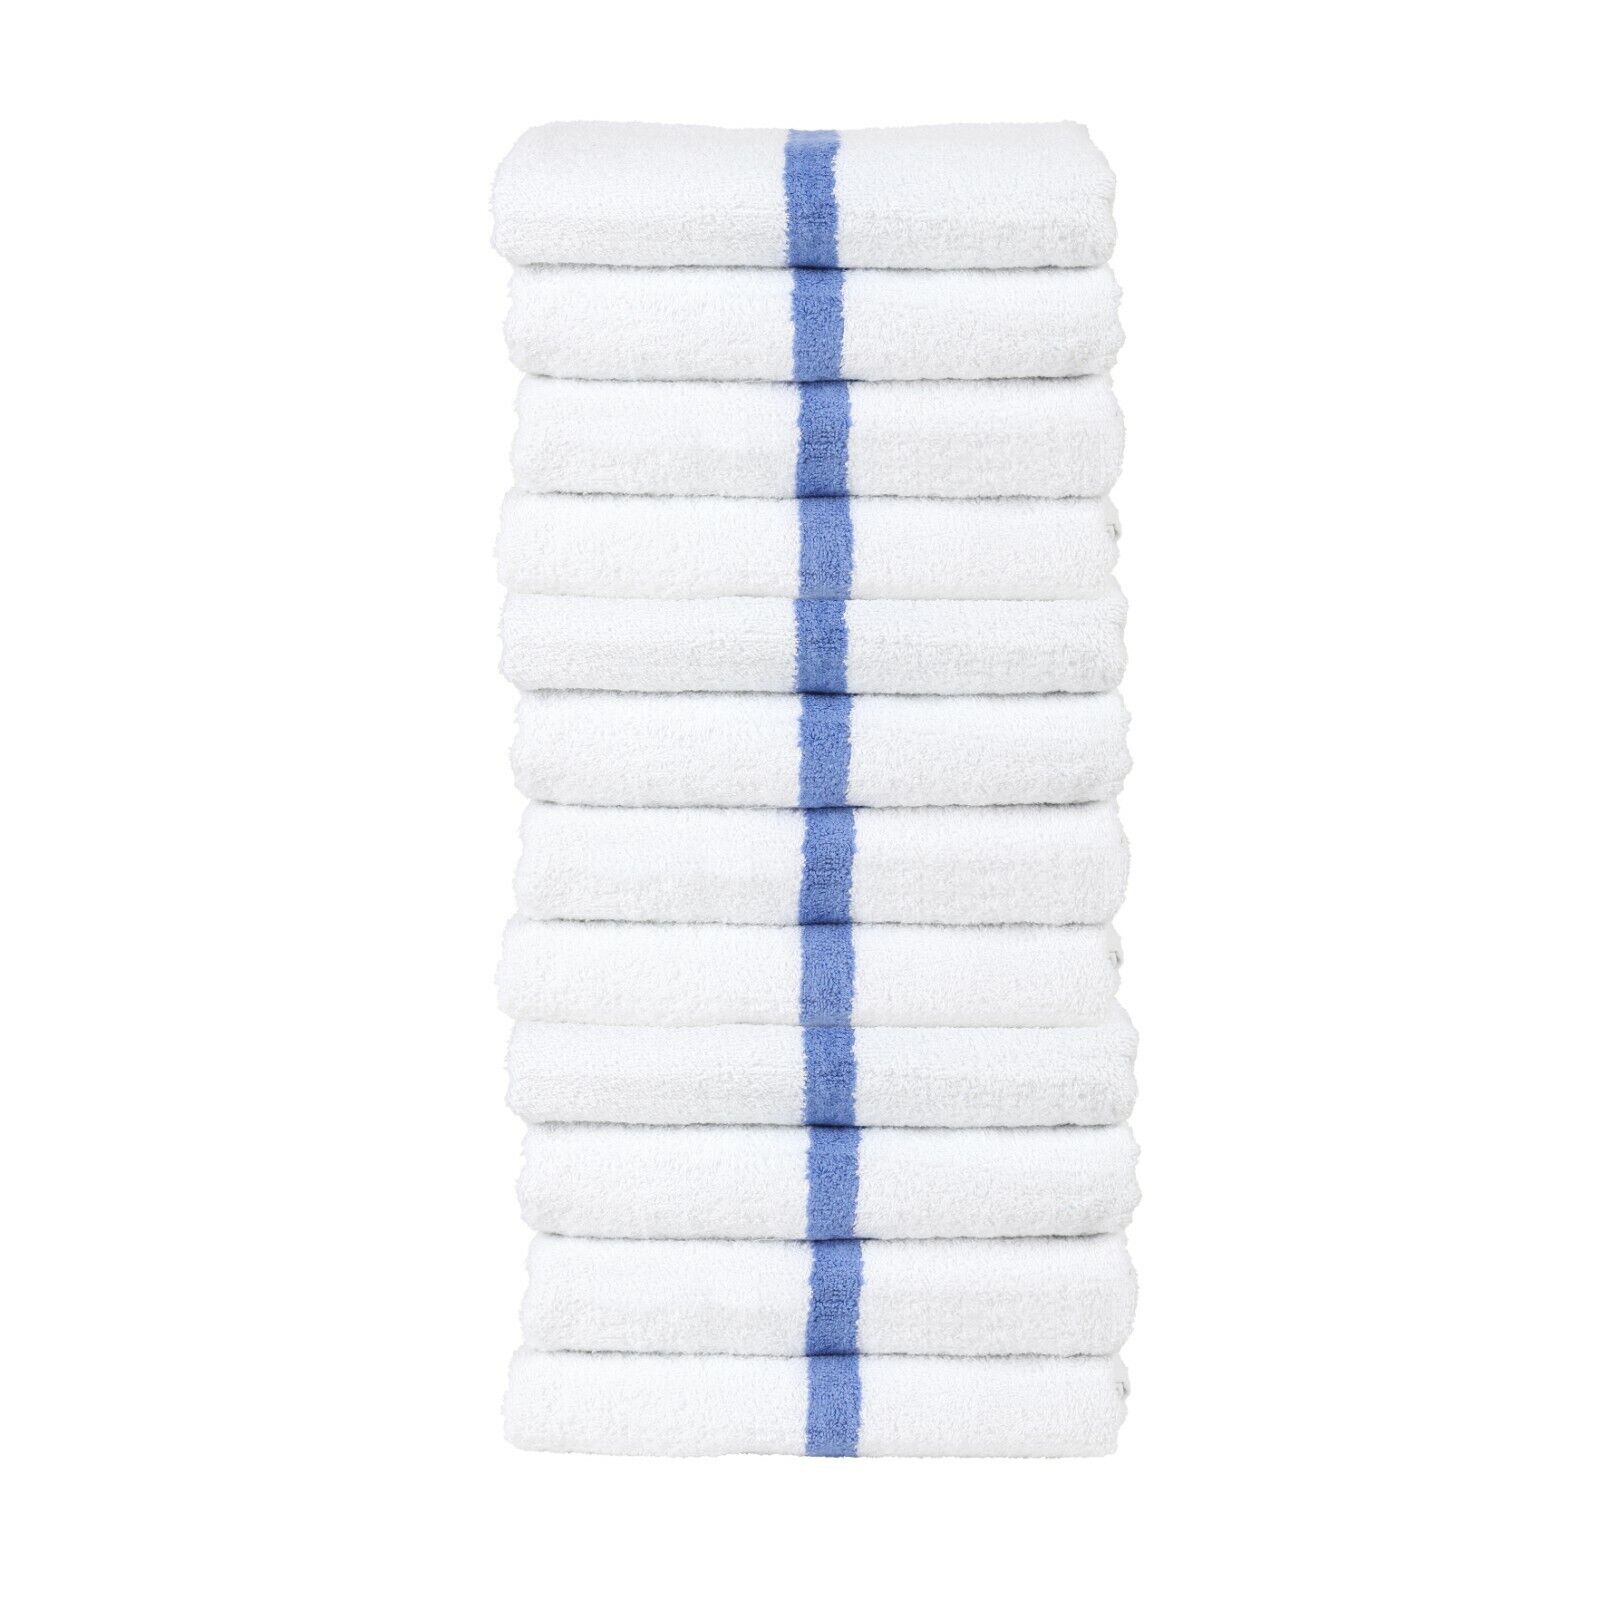 Striped Cotton Pool Towels - Bulk Value 12 Pack - 22 x 44 - White w/ Blue Stripe Arkwright